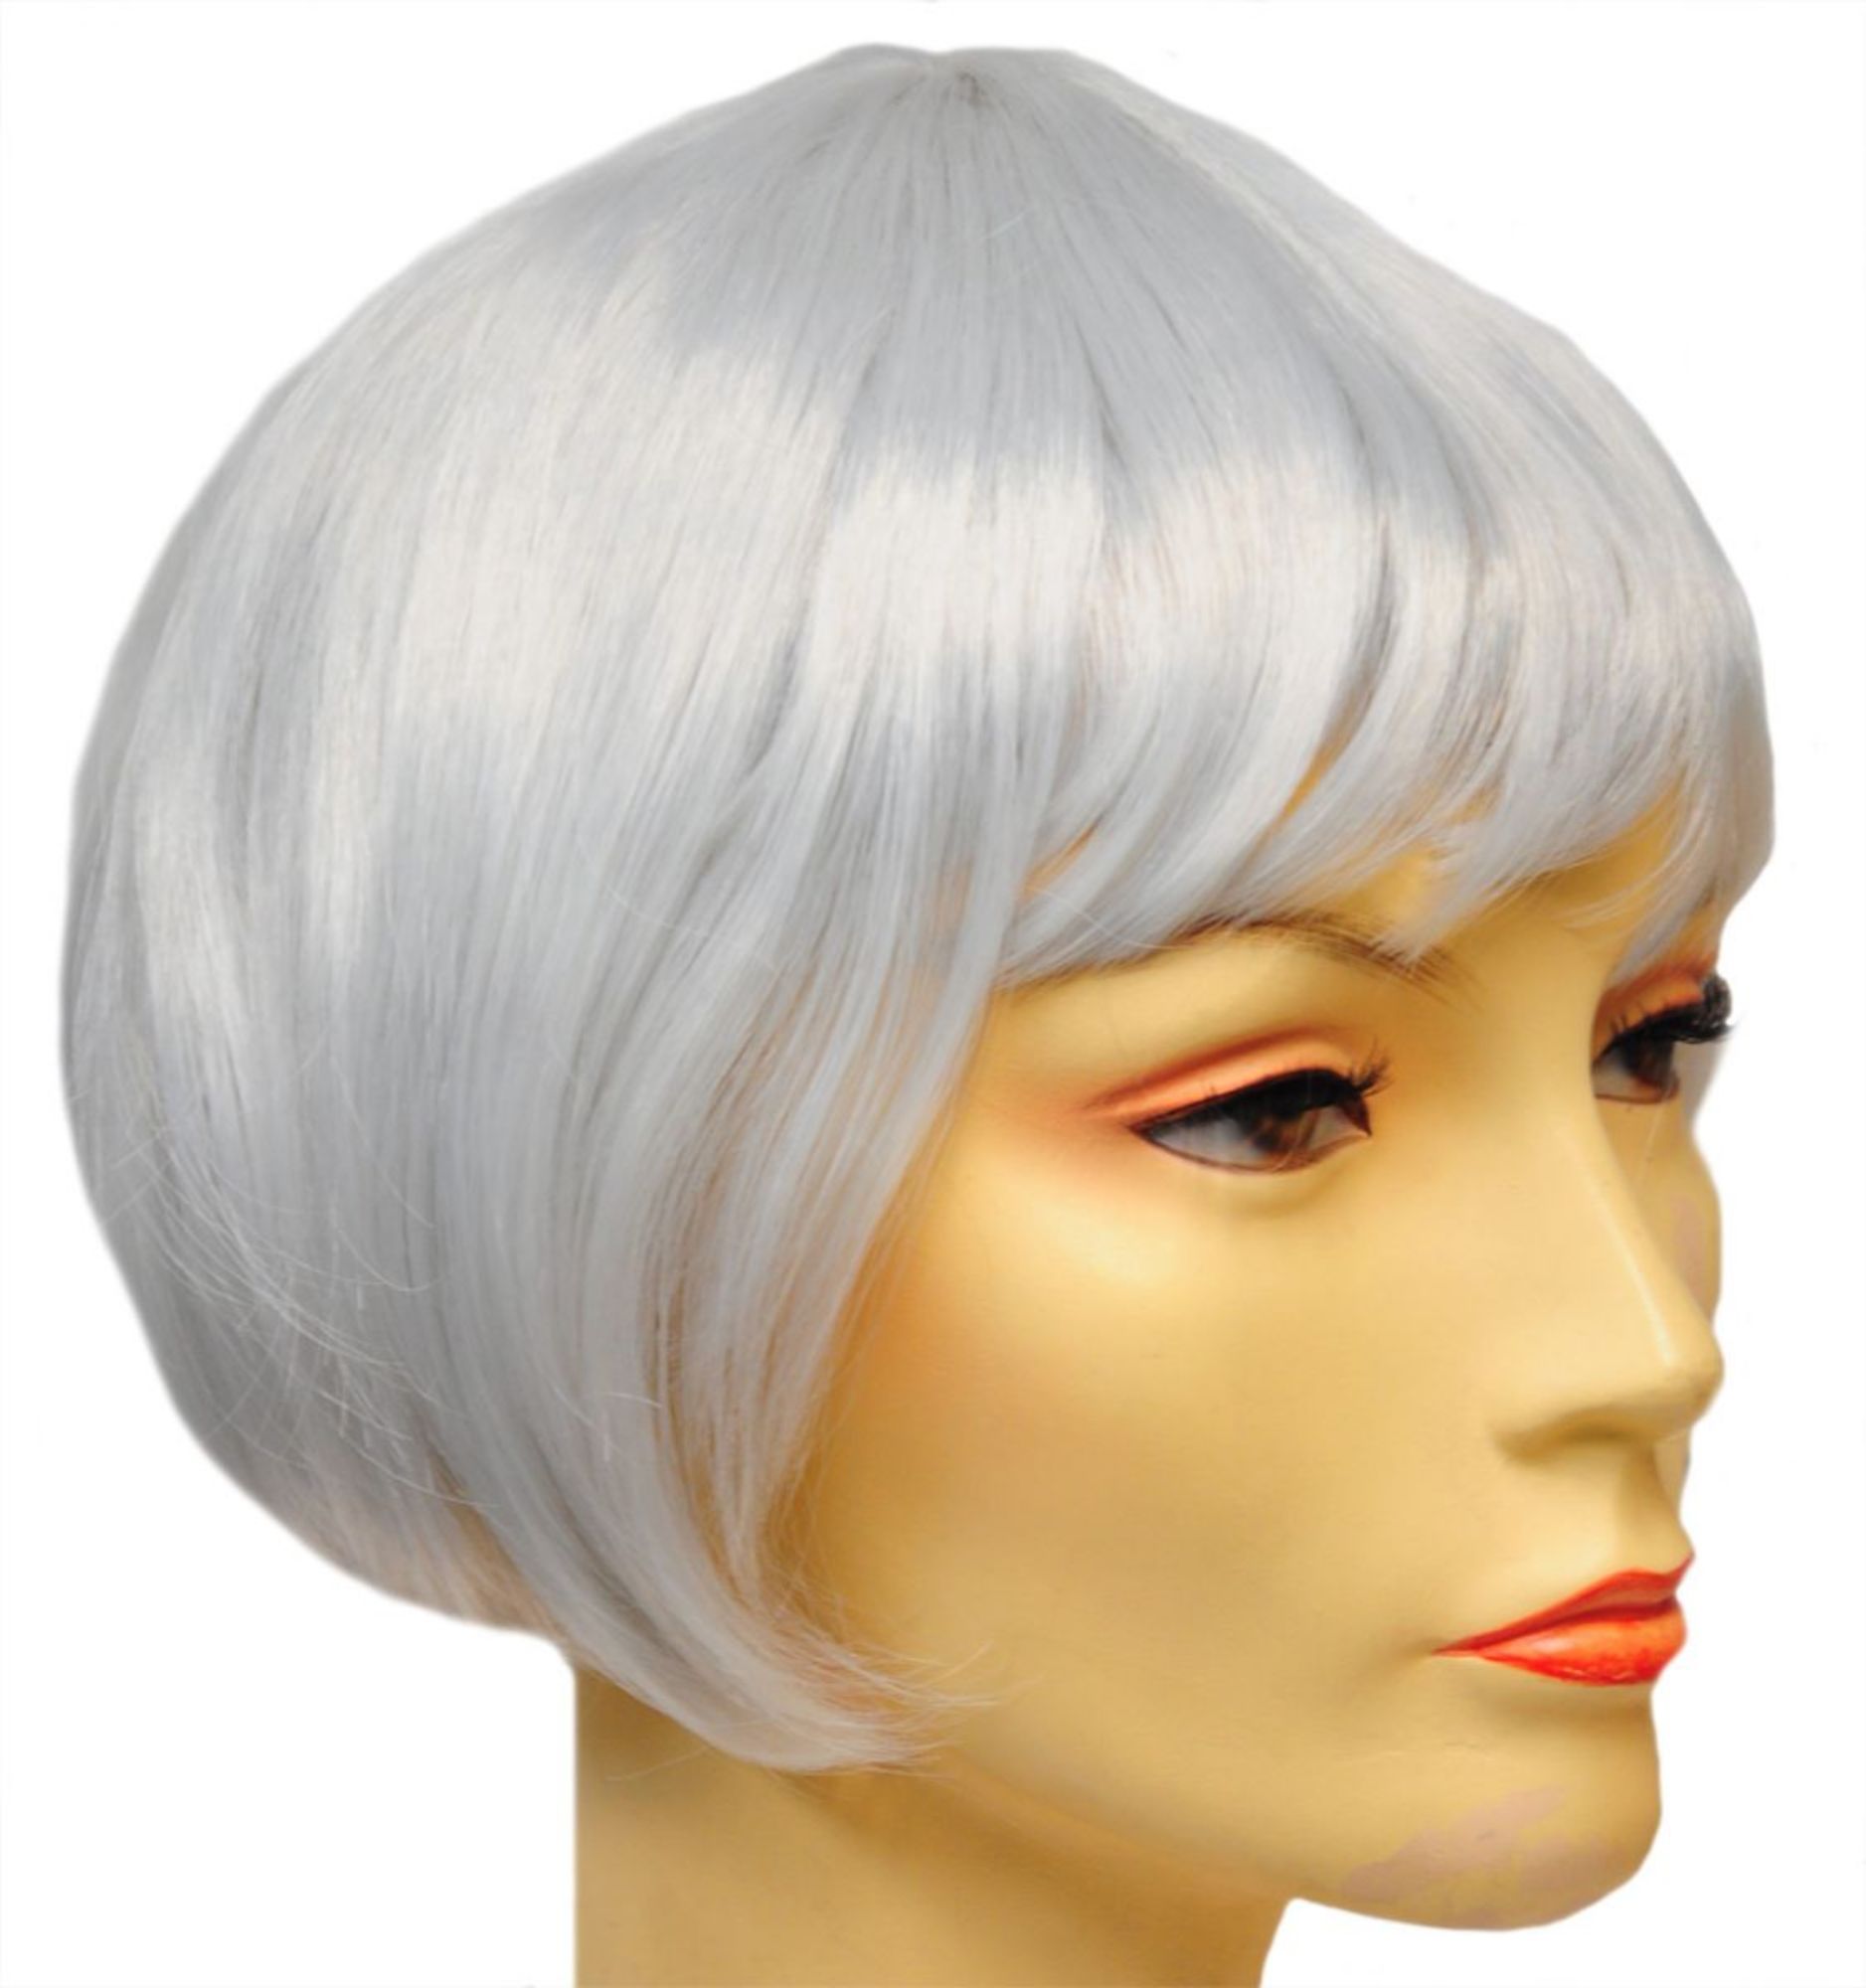 The Costume Center White Lulu Women Adult Halloween Wig Costume Accessory - One Size